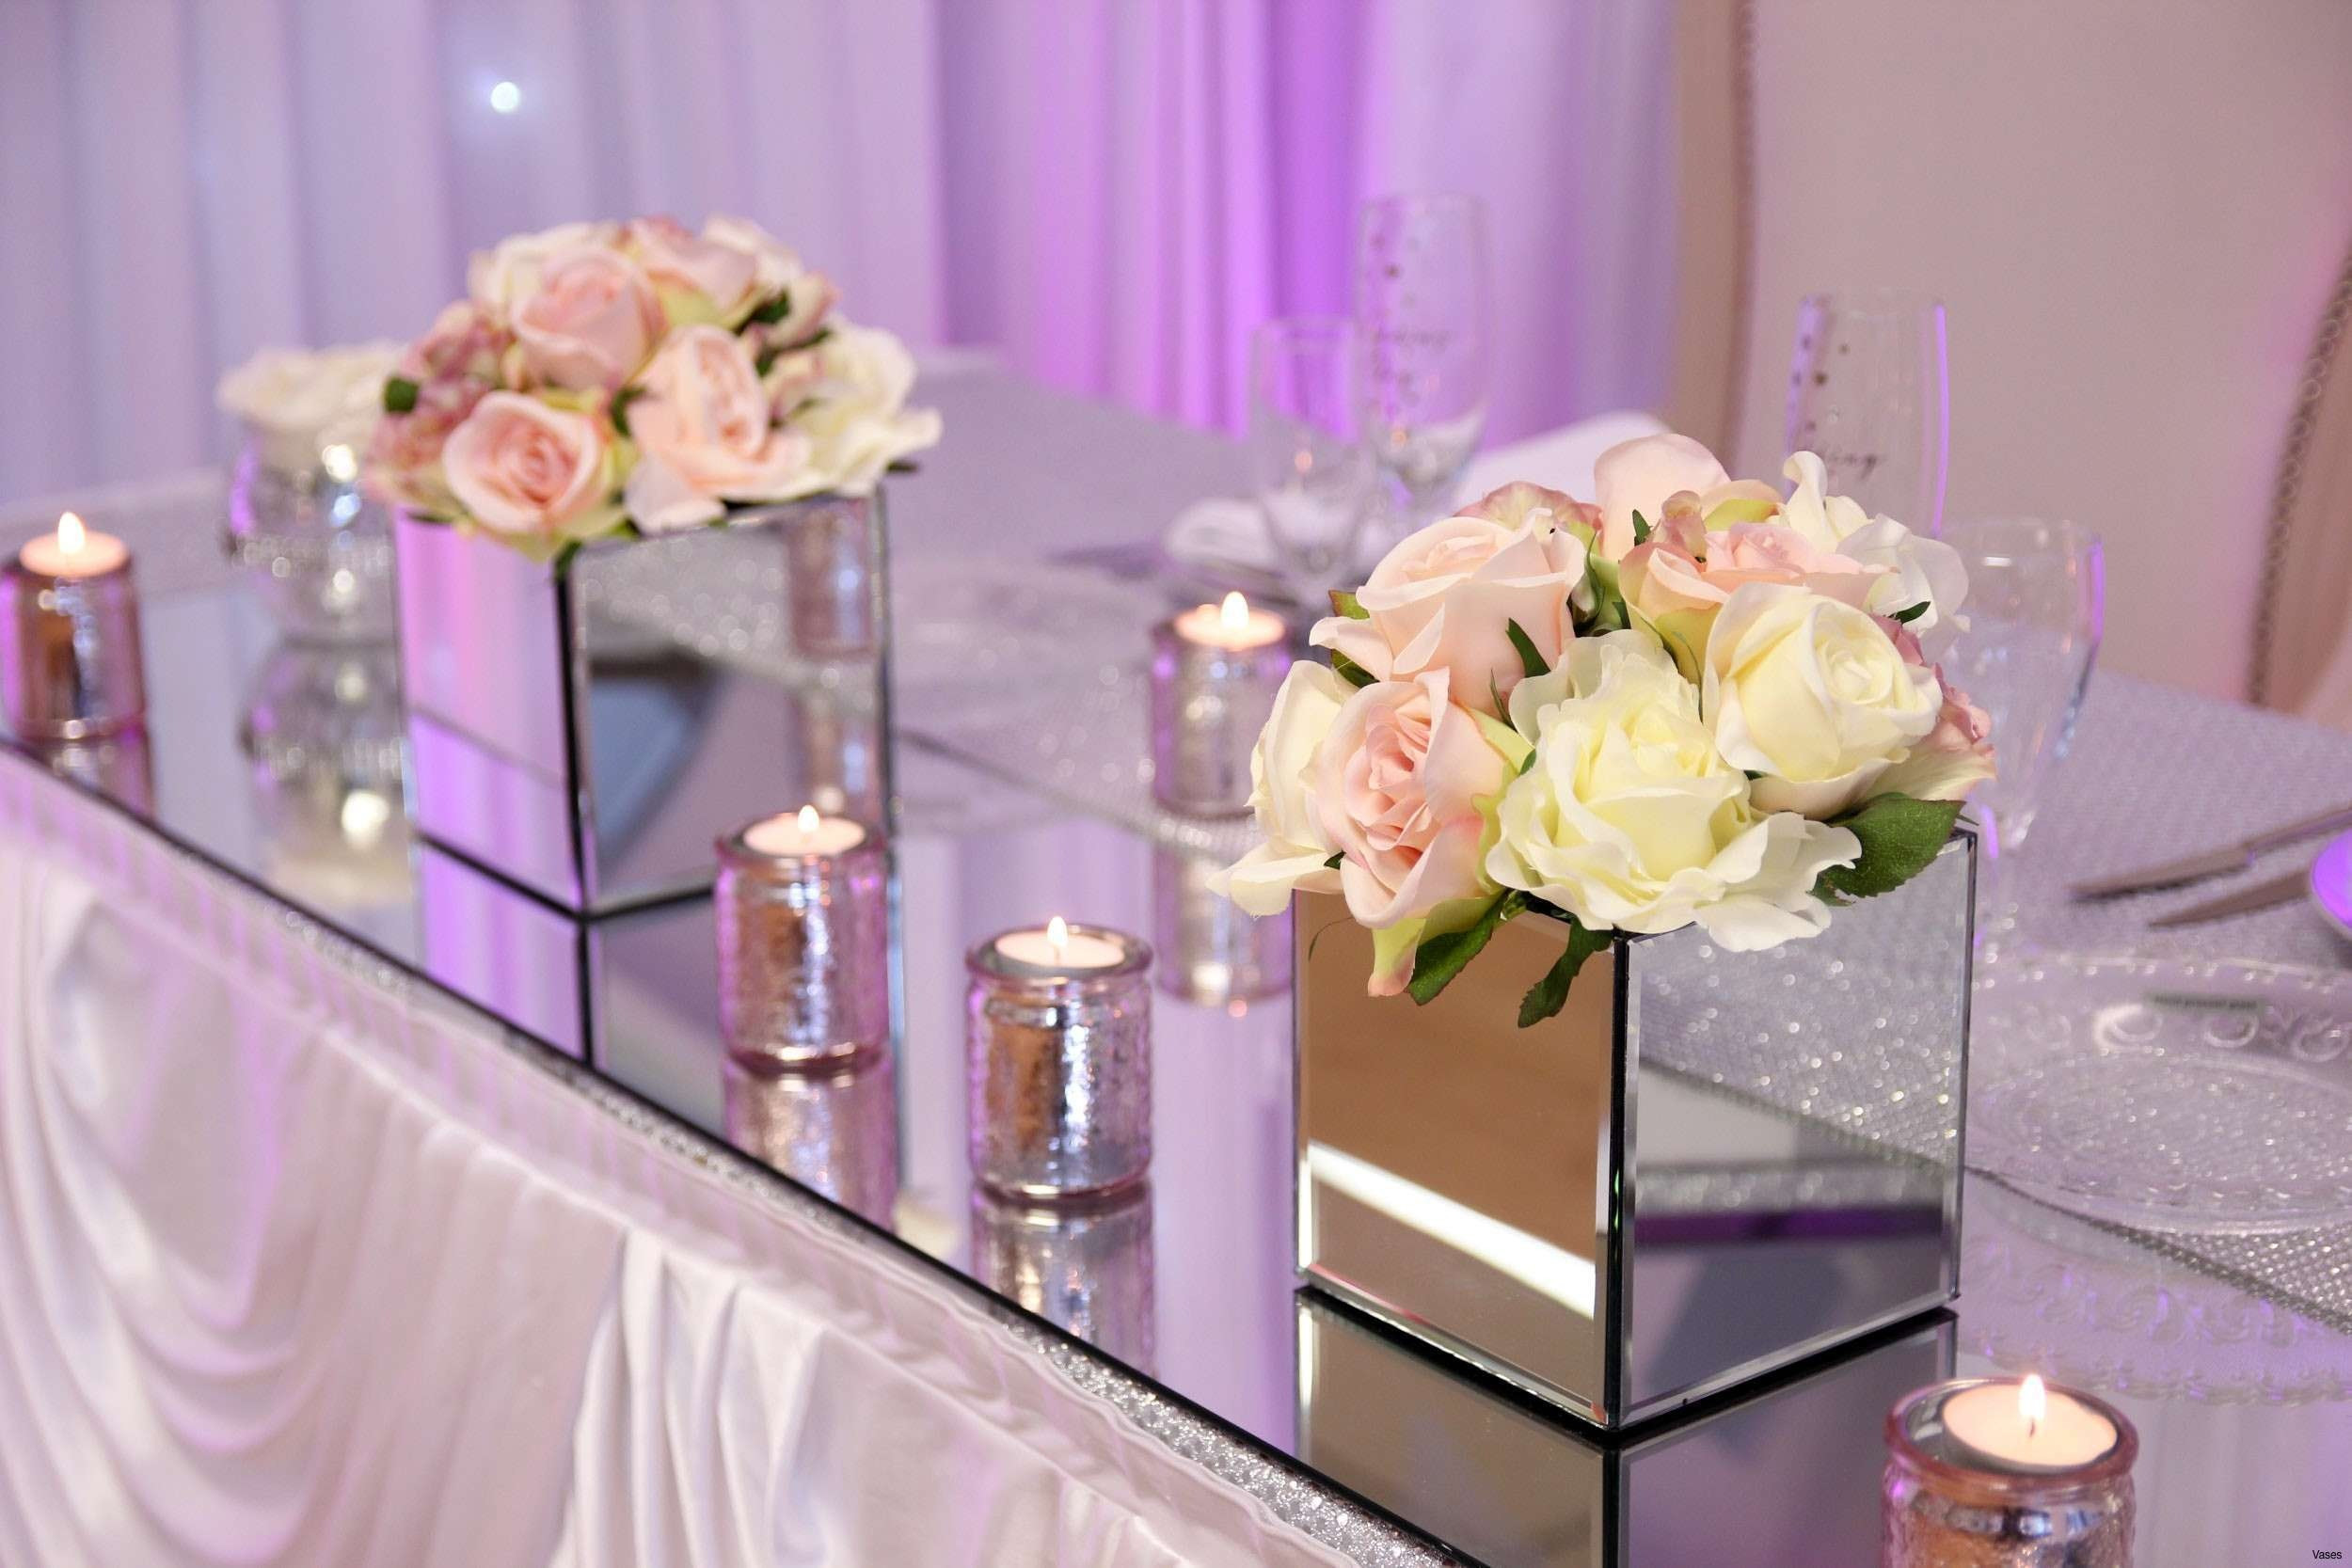 12 Spectacular Mexican Wedding Vase 2024 free download mexican wedding vase of table de reception best mirrored square vase 3h vases mirror table with regard to table de reception best mirrored square vase 3h vases mirror table decorationi 0d we